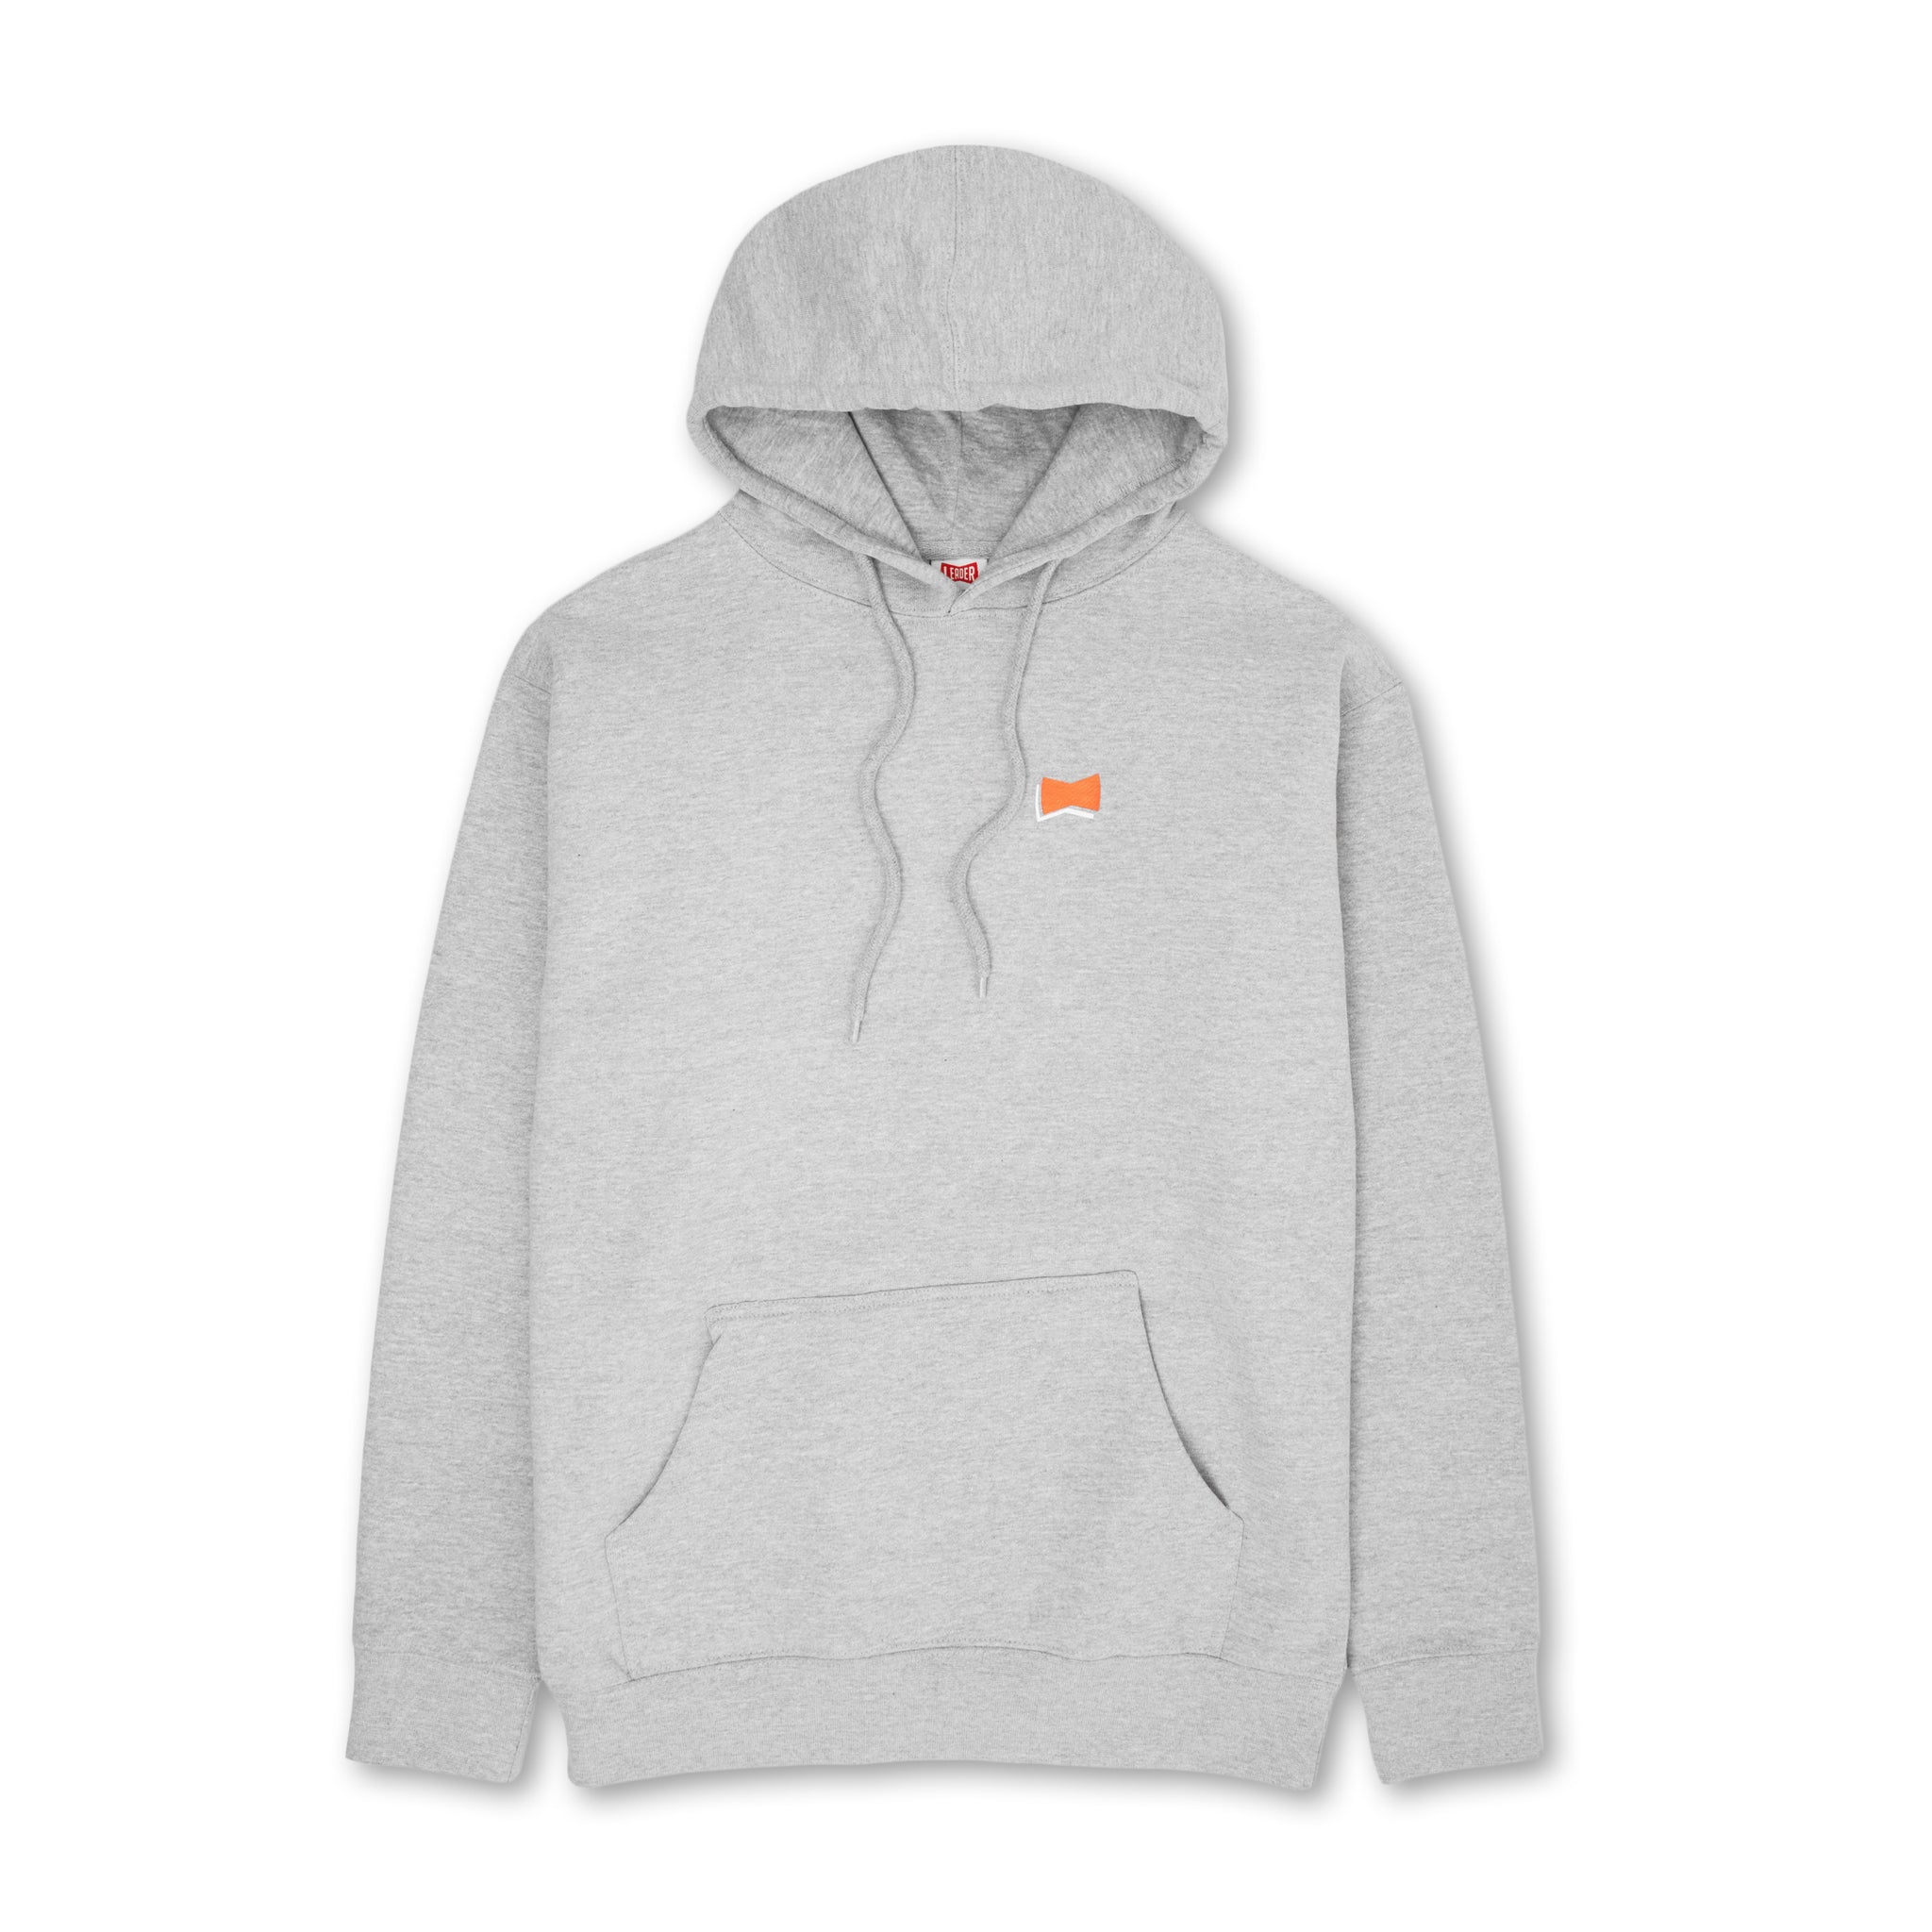 For The Creative Game Hoodie